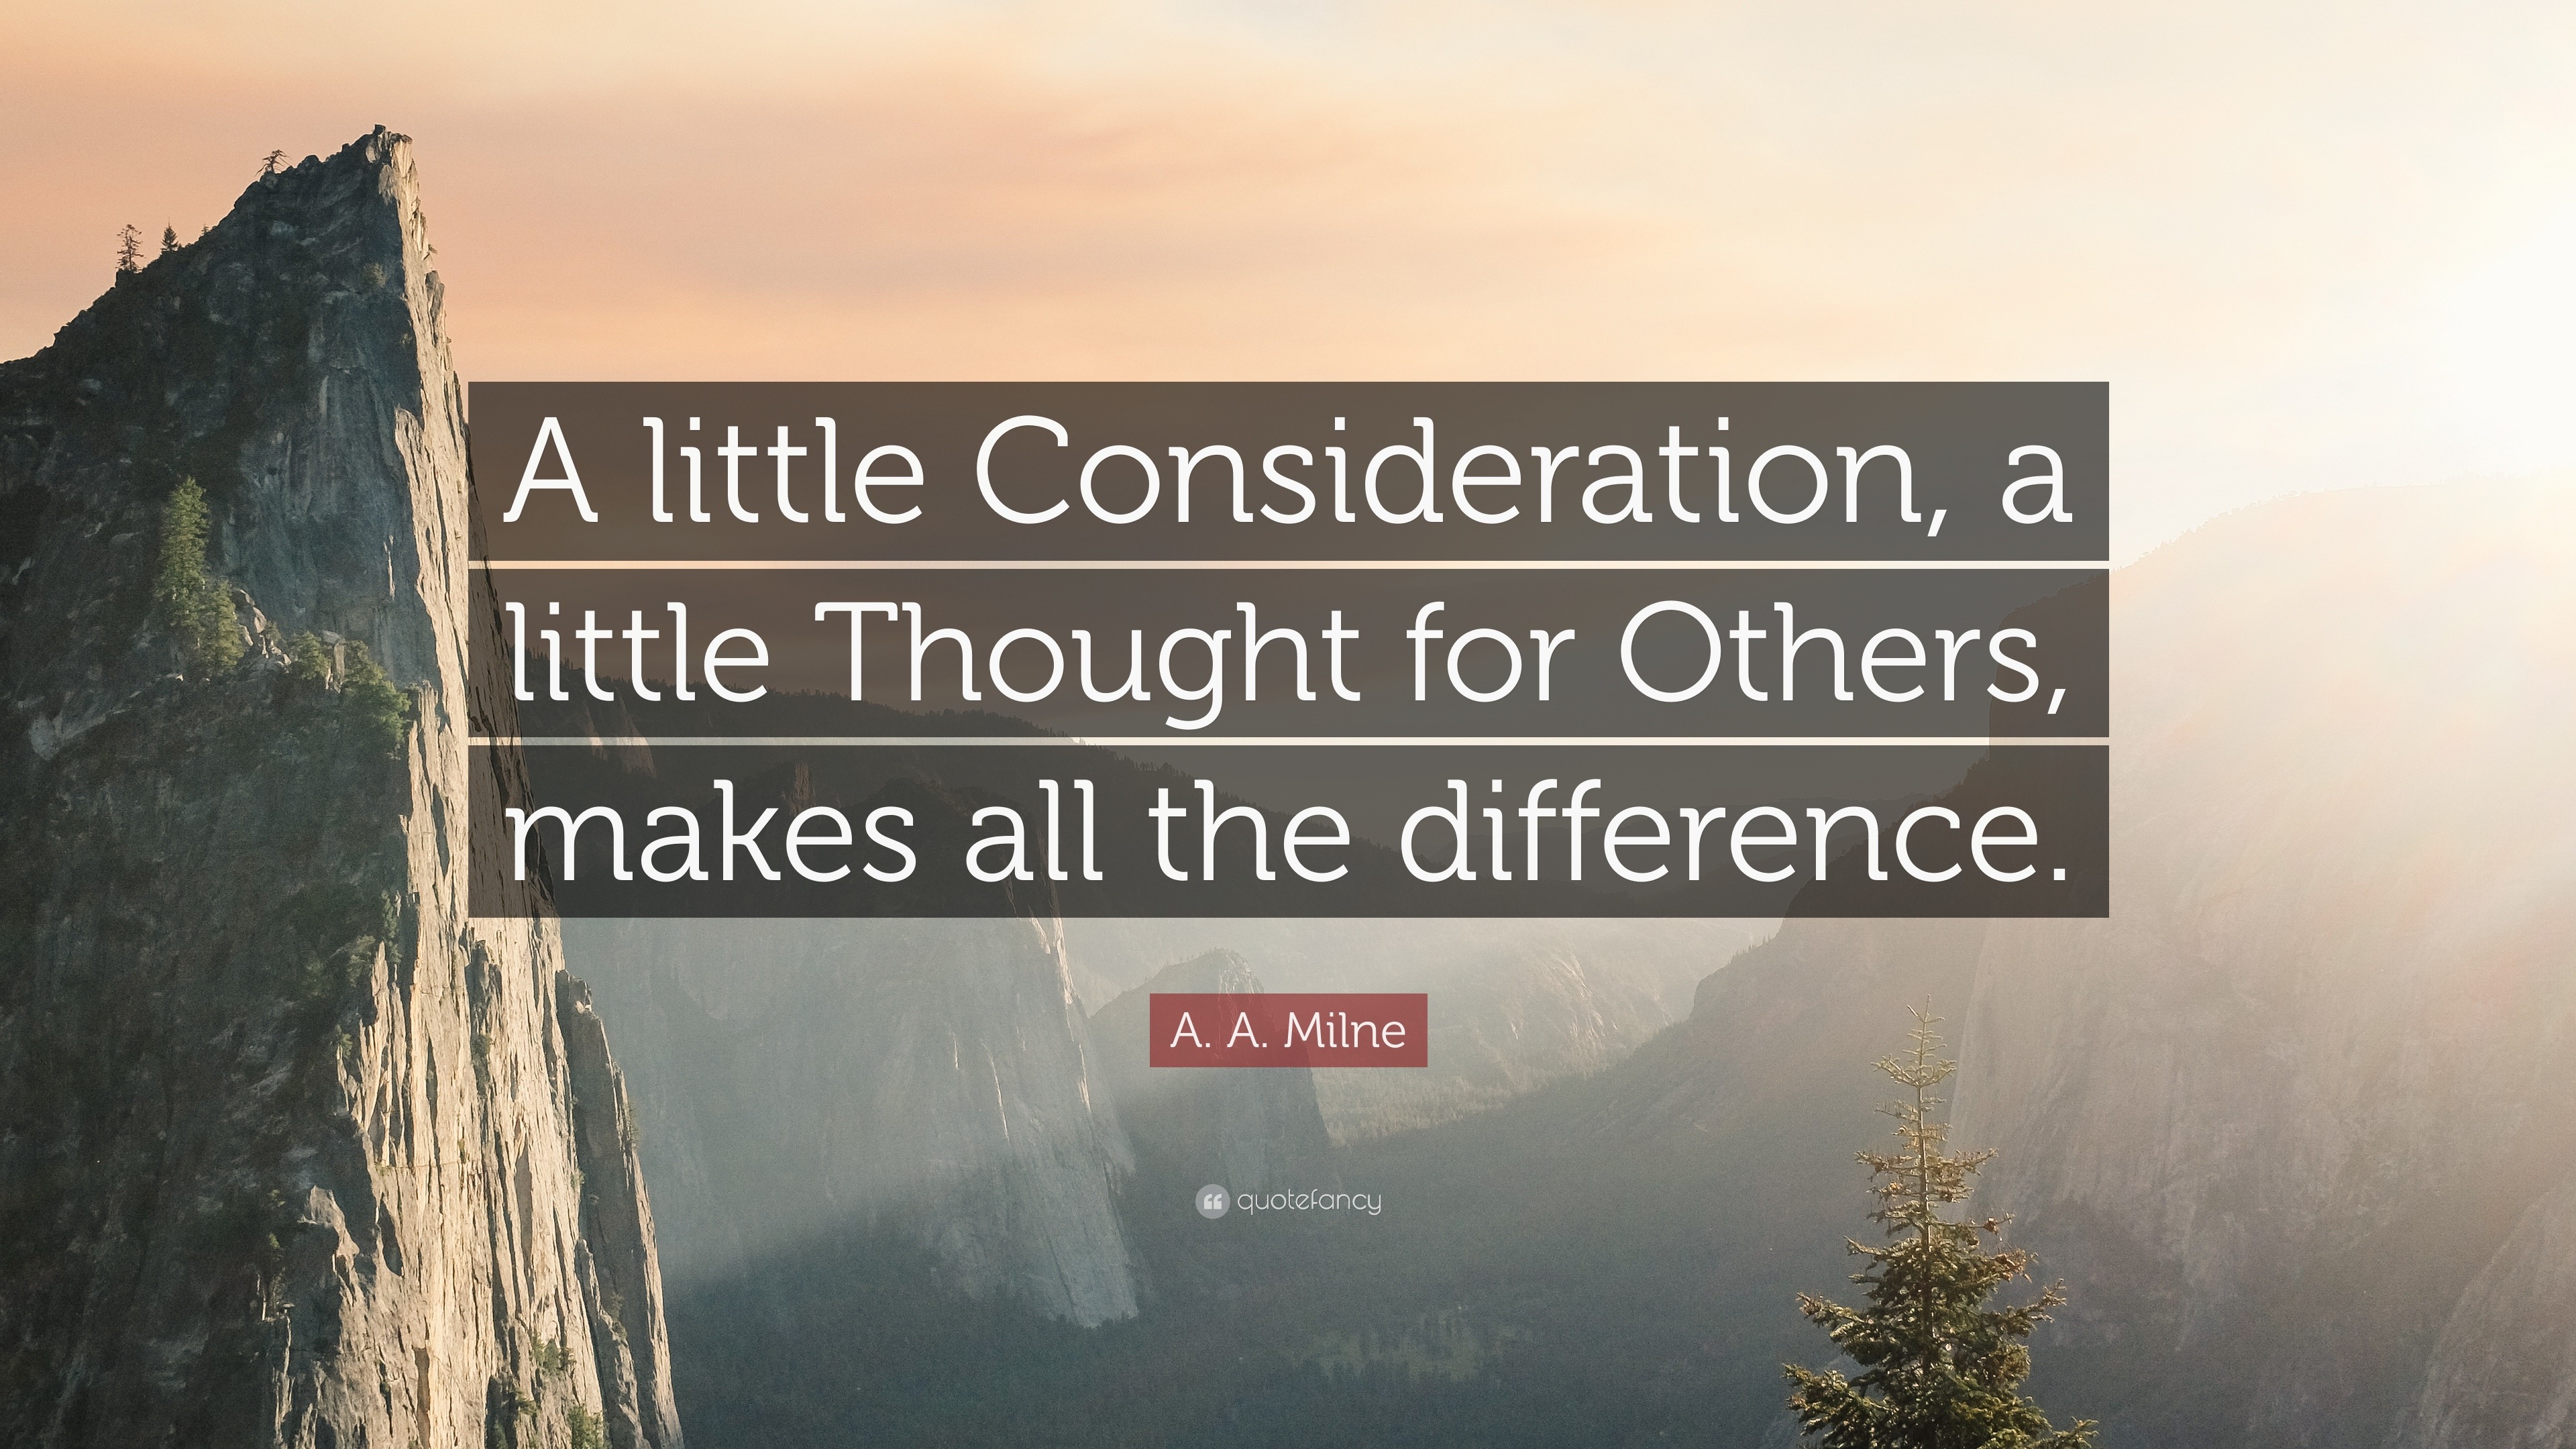 307028 A A Milne Quote A little Consideration a little Thought for Others